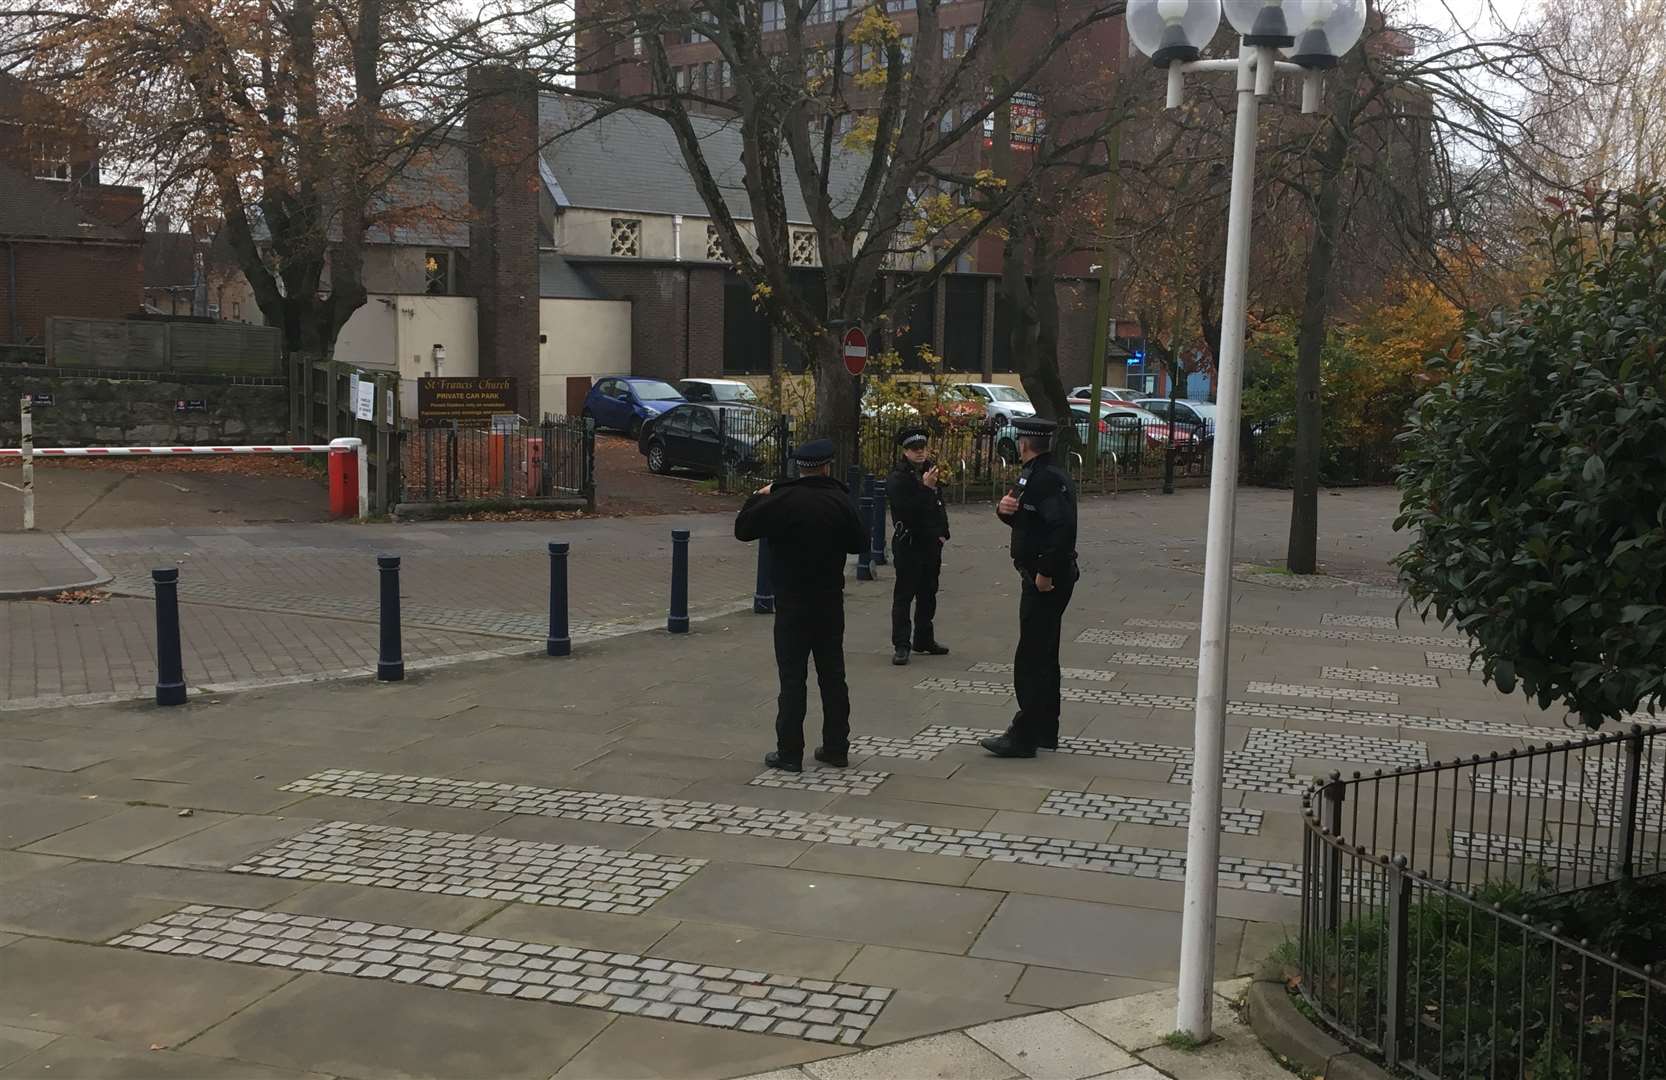 Police were seen outside of County Hall, Maidstone